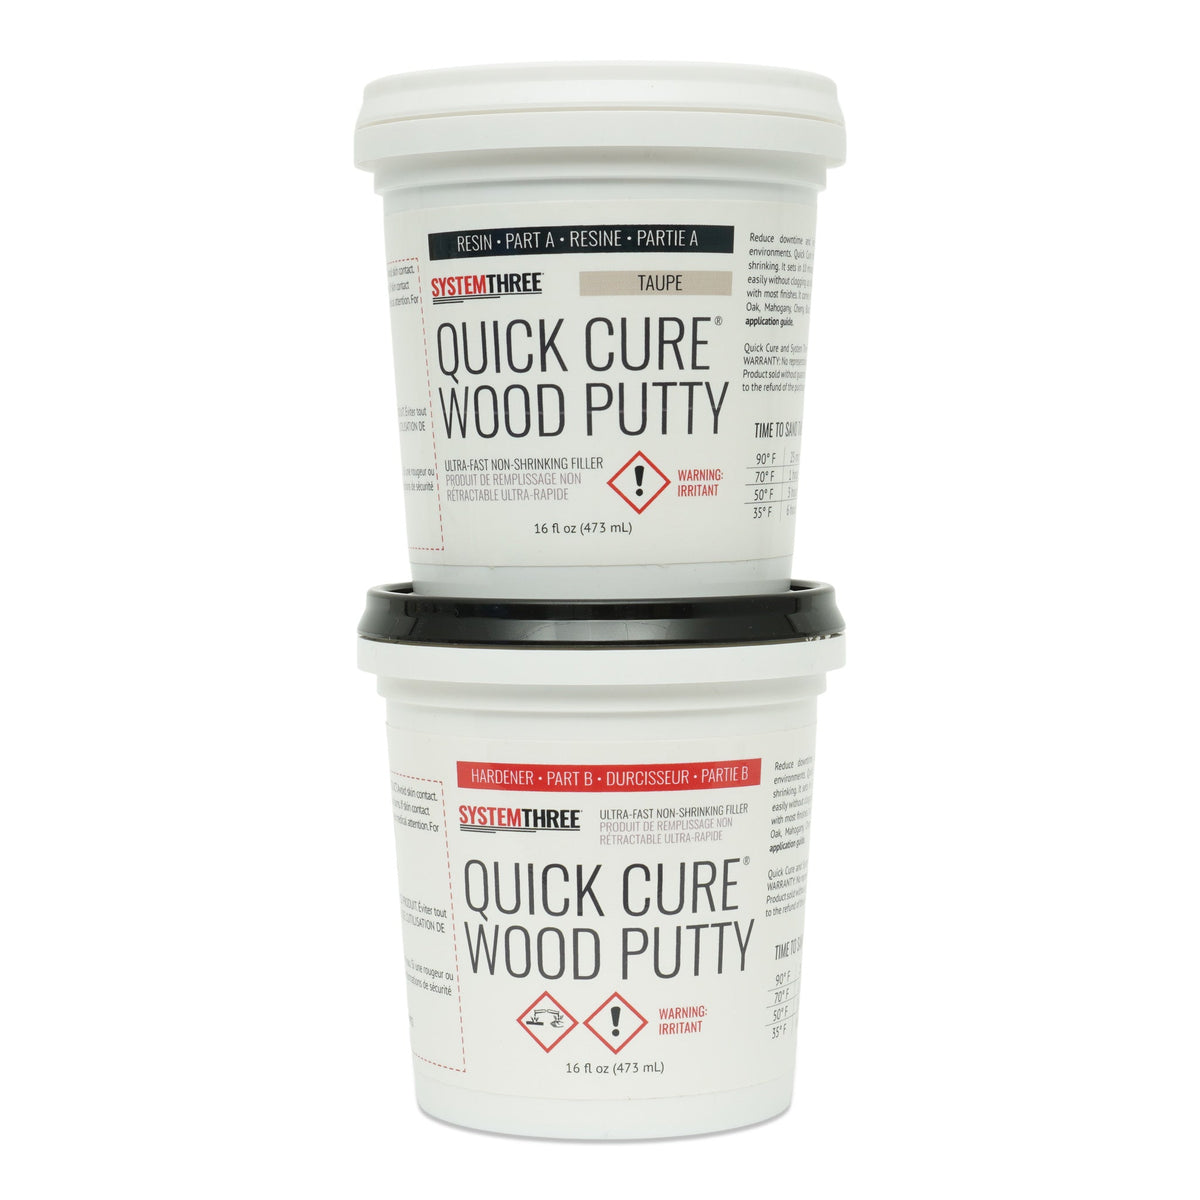 HOME PUTTY FOR WALL AND WOOD 🧱 Fast and economical! We put it to